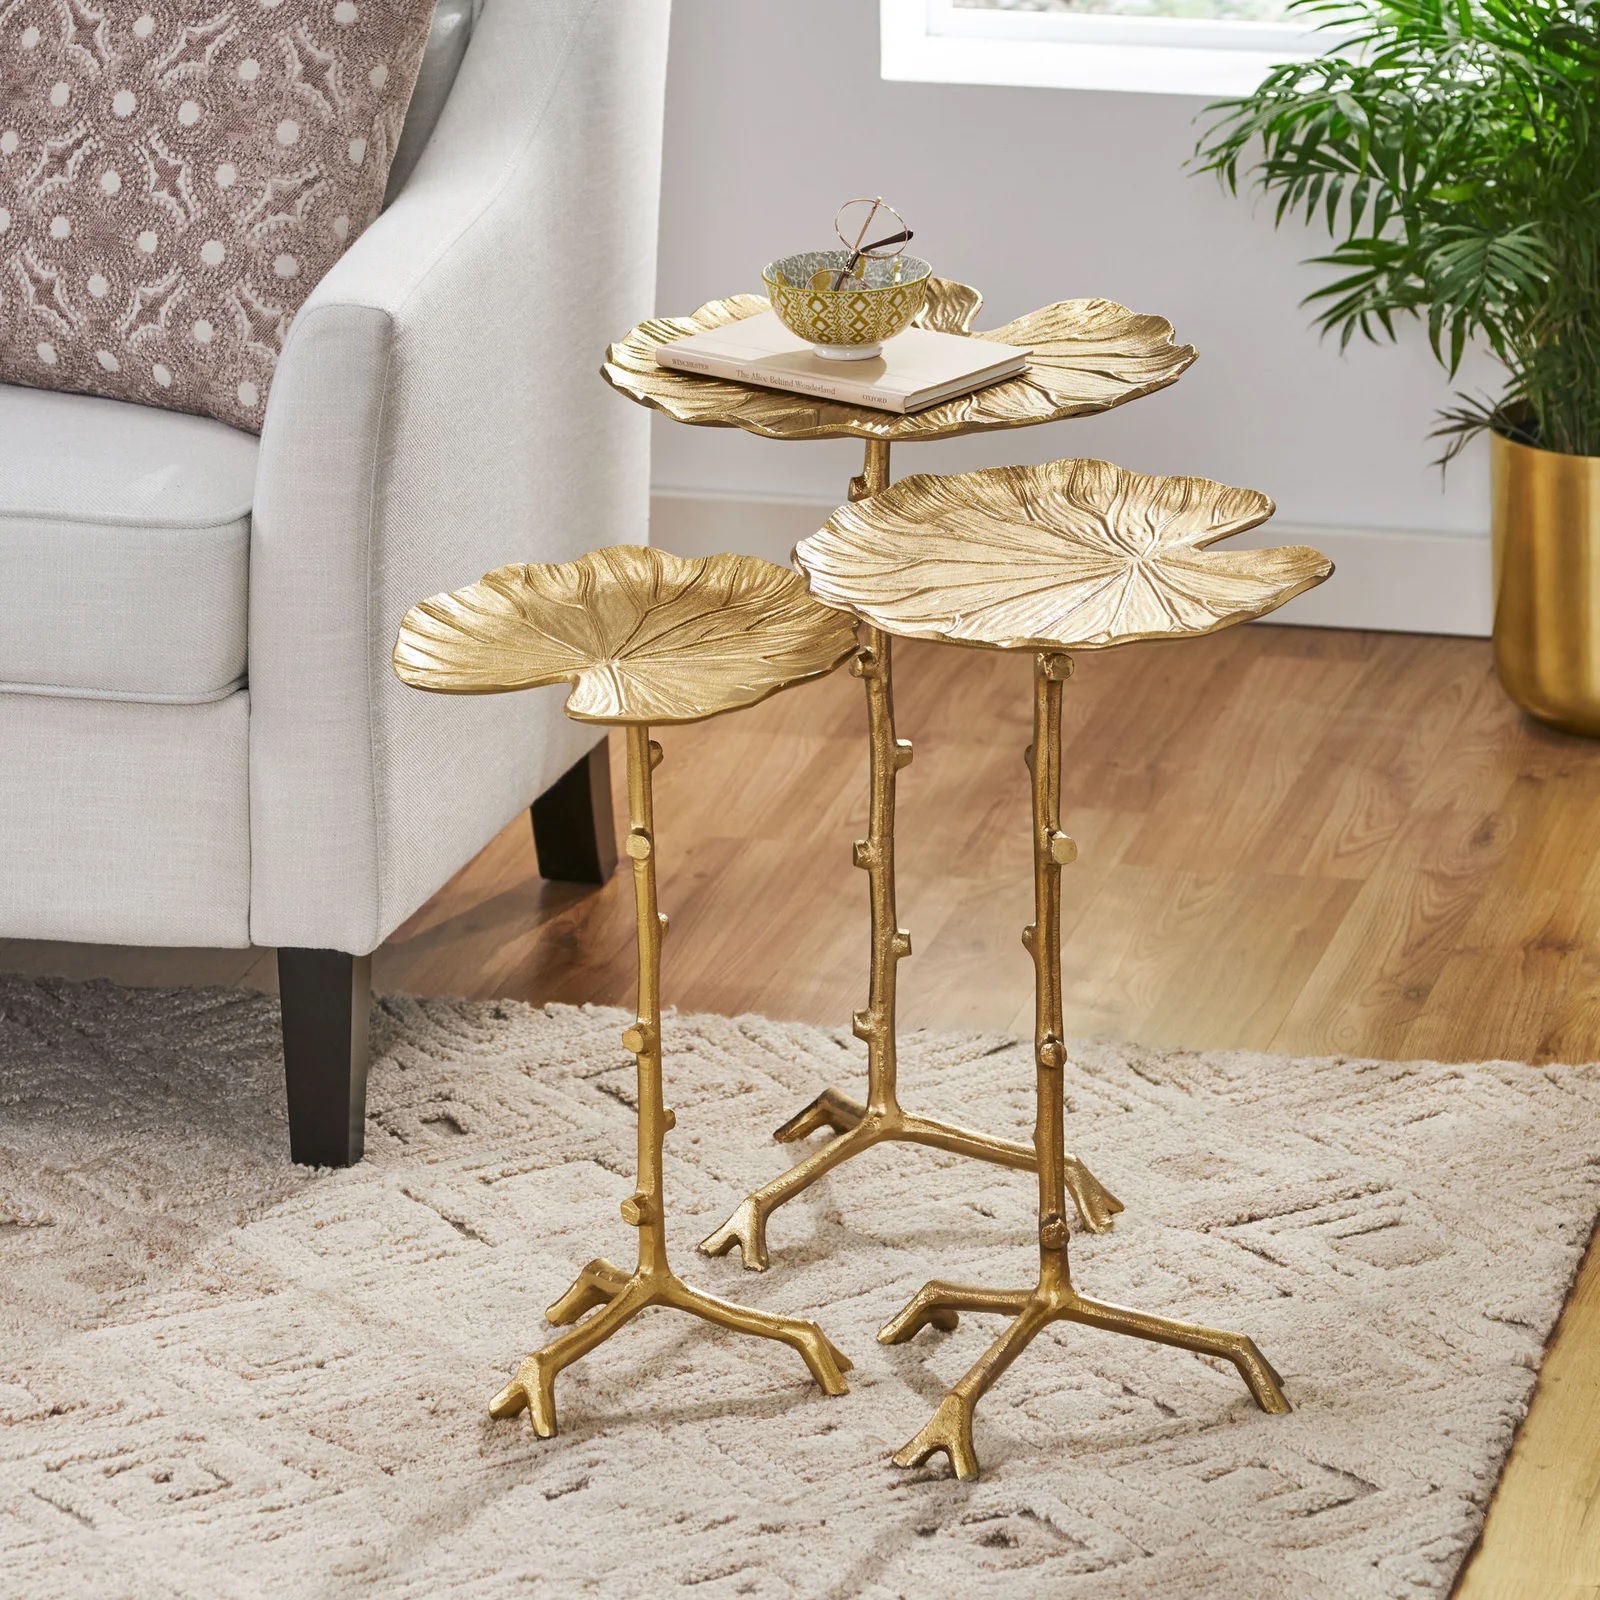 unique end tables for living room sculpted cast aluminum lily pad drink tables grouping small accent tables set artistic living room furniture for surrealist decor inspiration